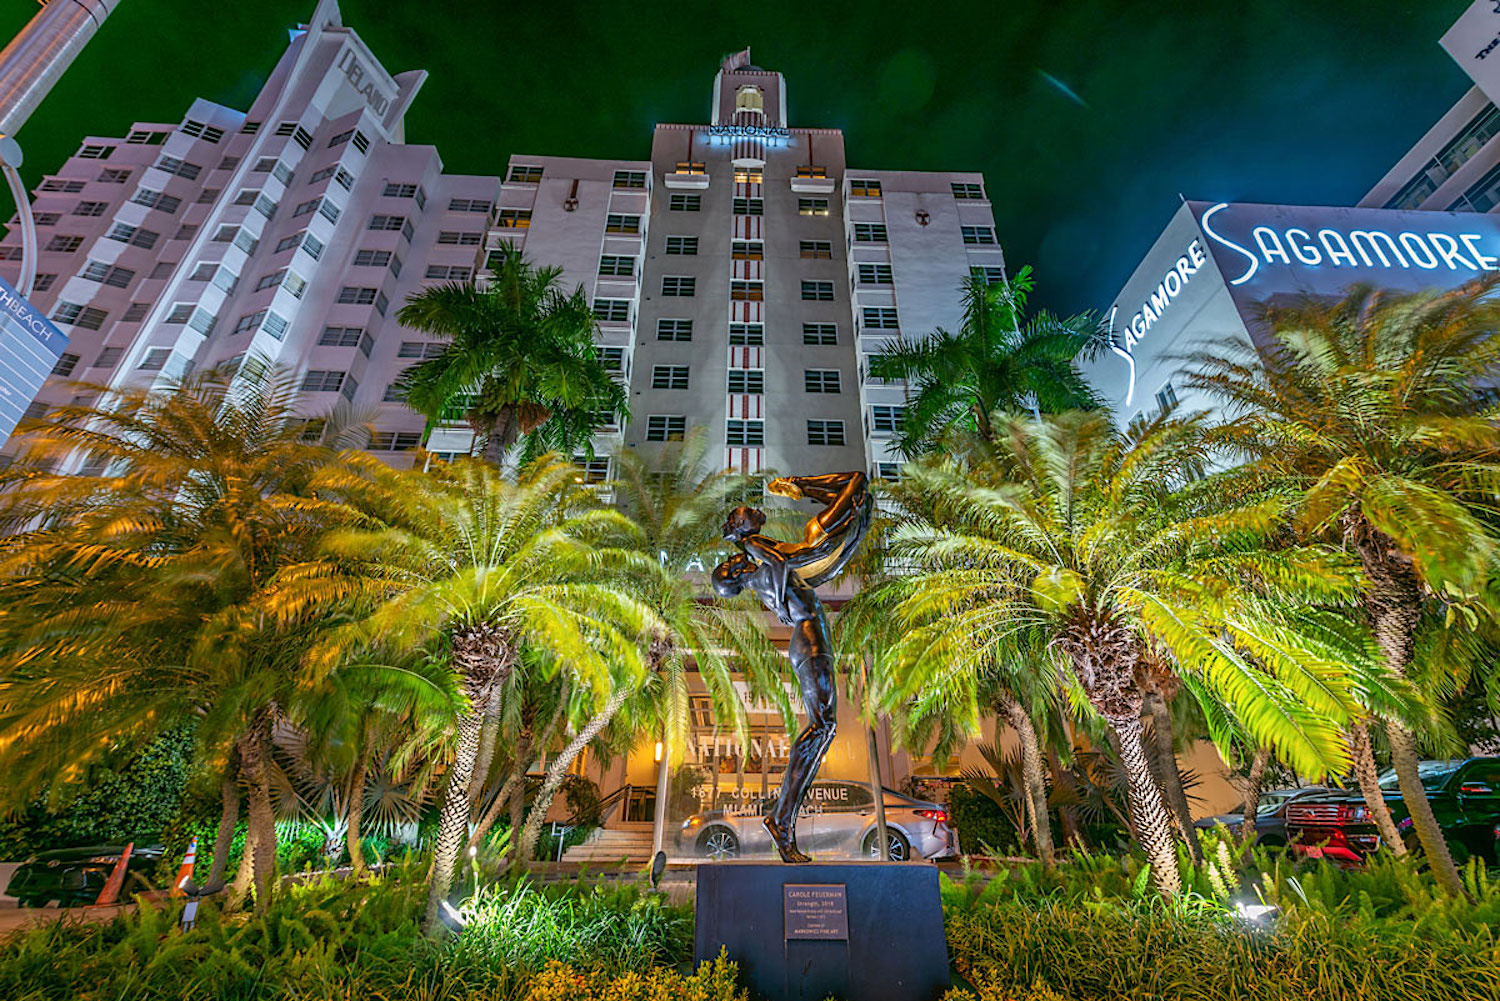 Large hotel building with a statue and palm trees at the front 